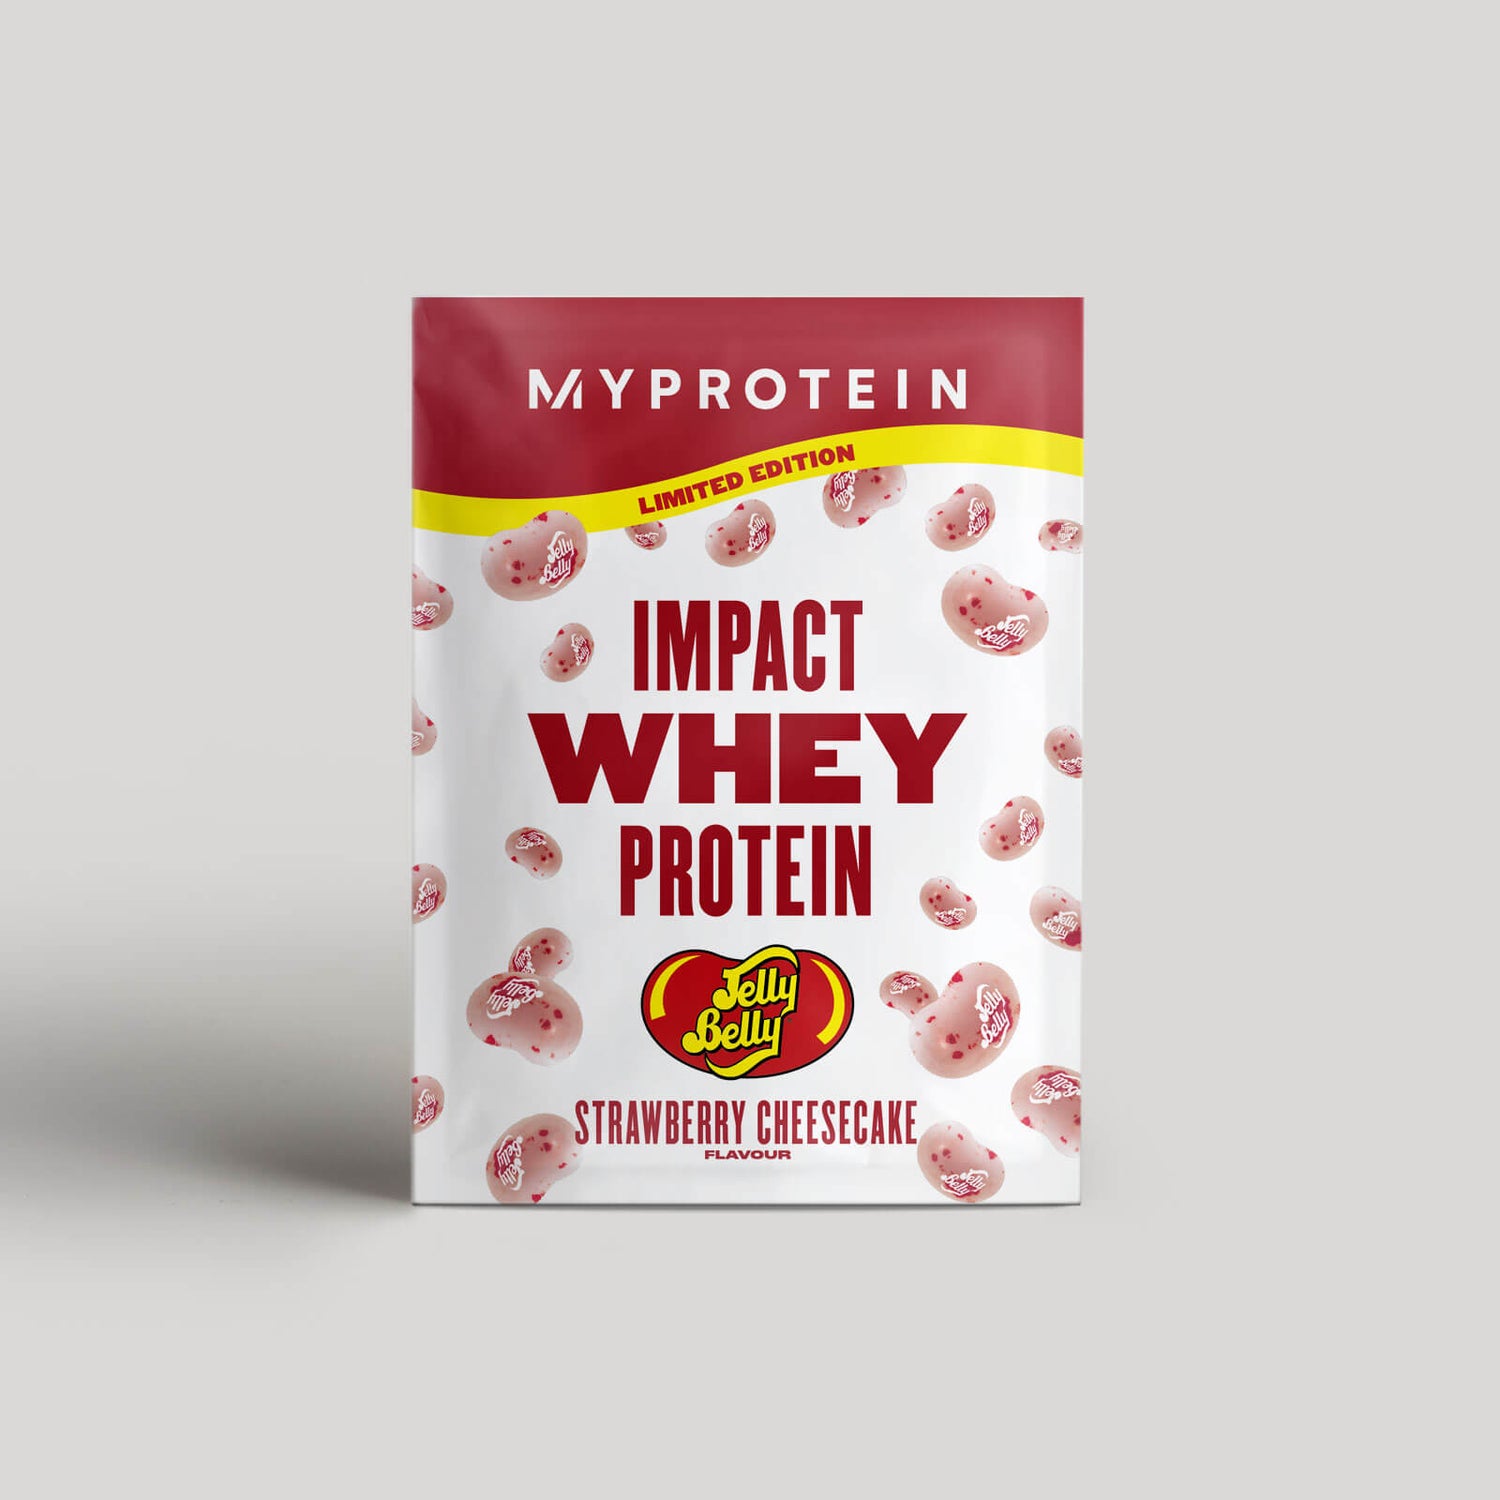 Impact Whey Protein (Sample) - 25g - Jelly Belly - Strawberry Cheesecake